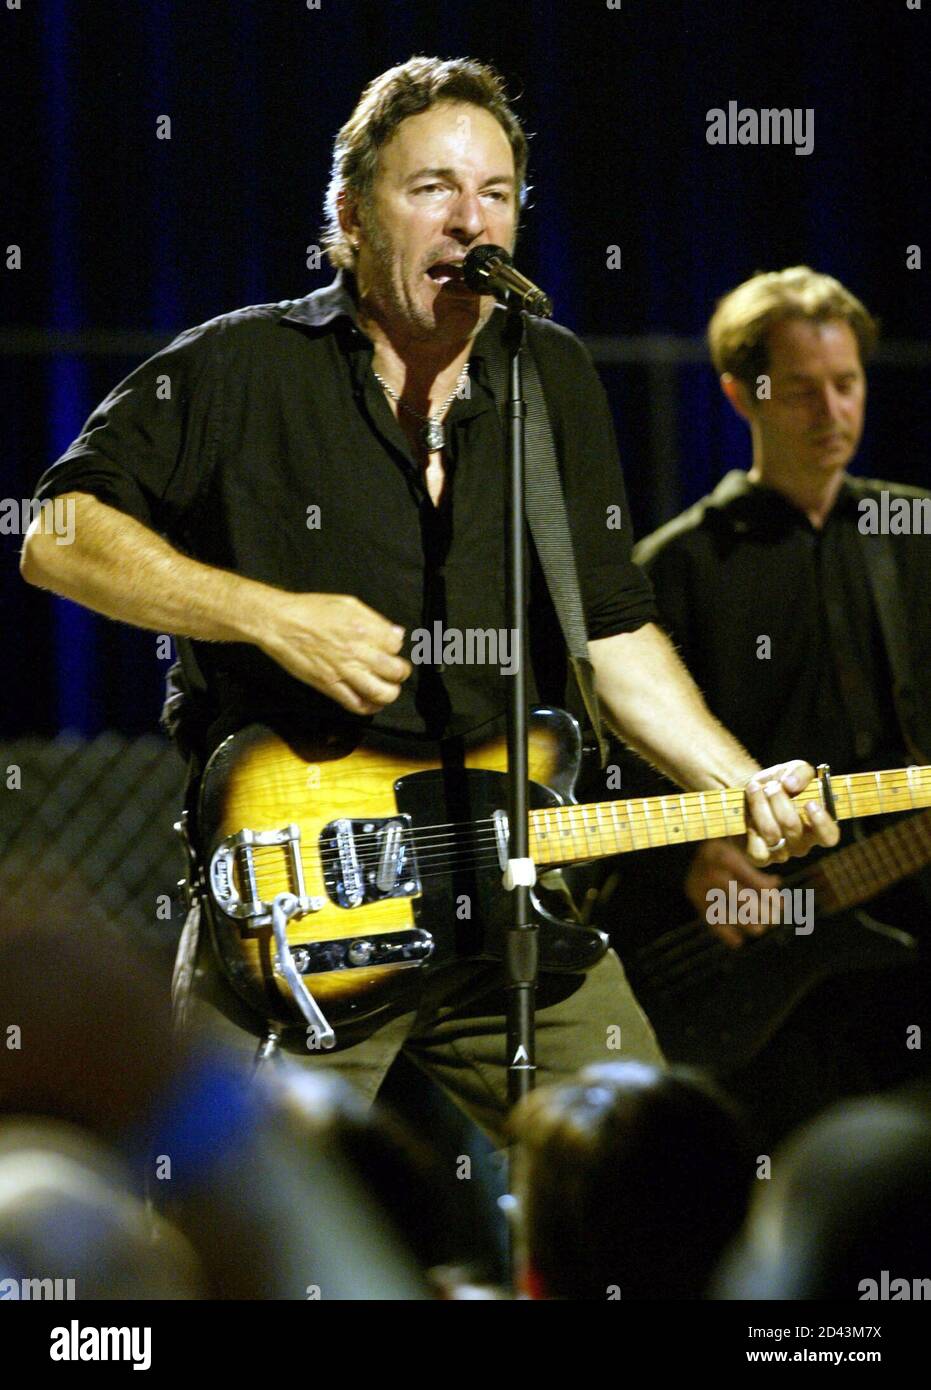 Rock star Bruce Springsteen performs at the Convention Center in Asbury  Park, New Jersey on July 30, 2002 as part of NBC television's "Today Show"  Summer Concert Series. Springsteen played to thousands